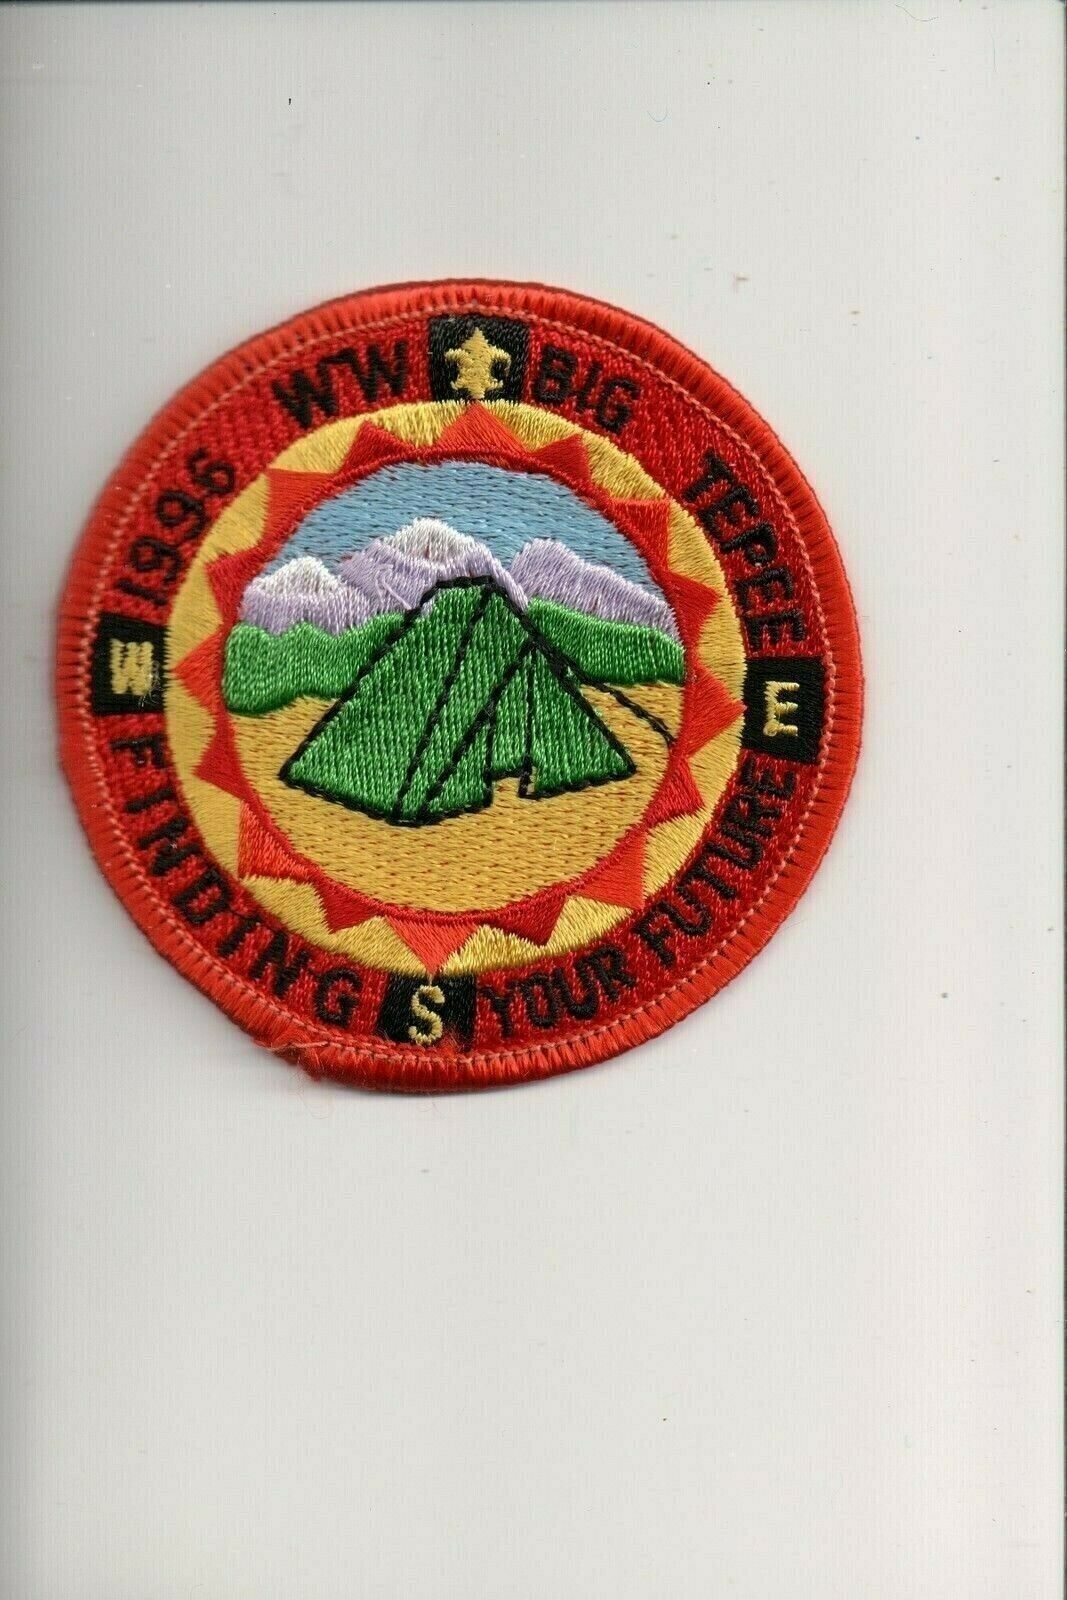 1996 Northwest Big Tepee Finding Your Future patch